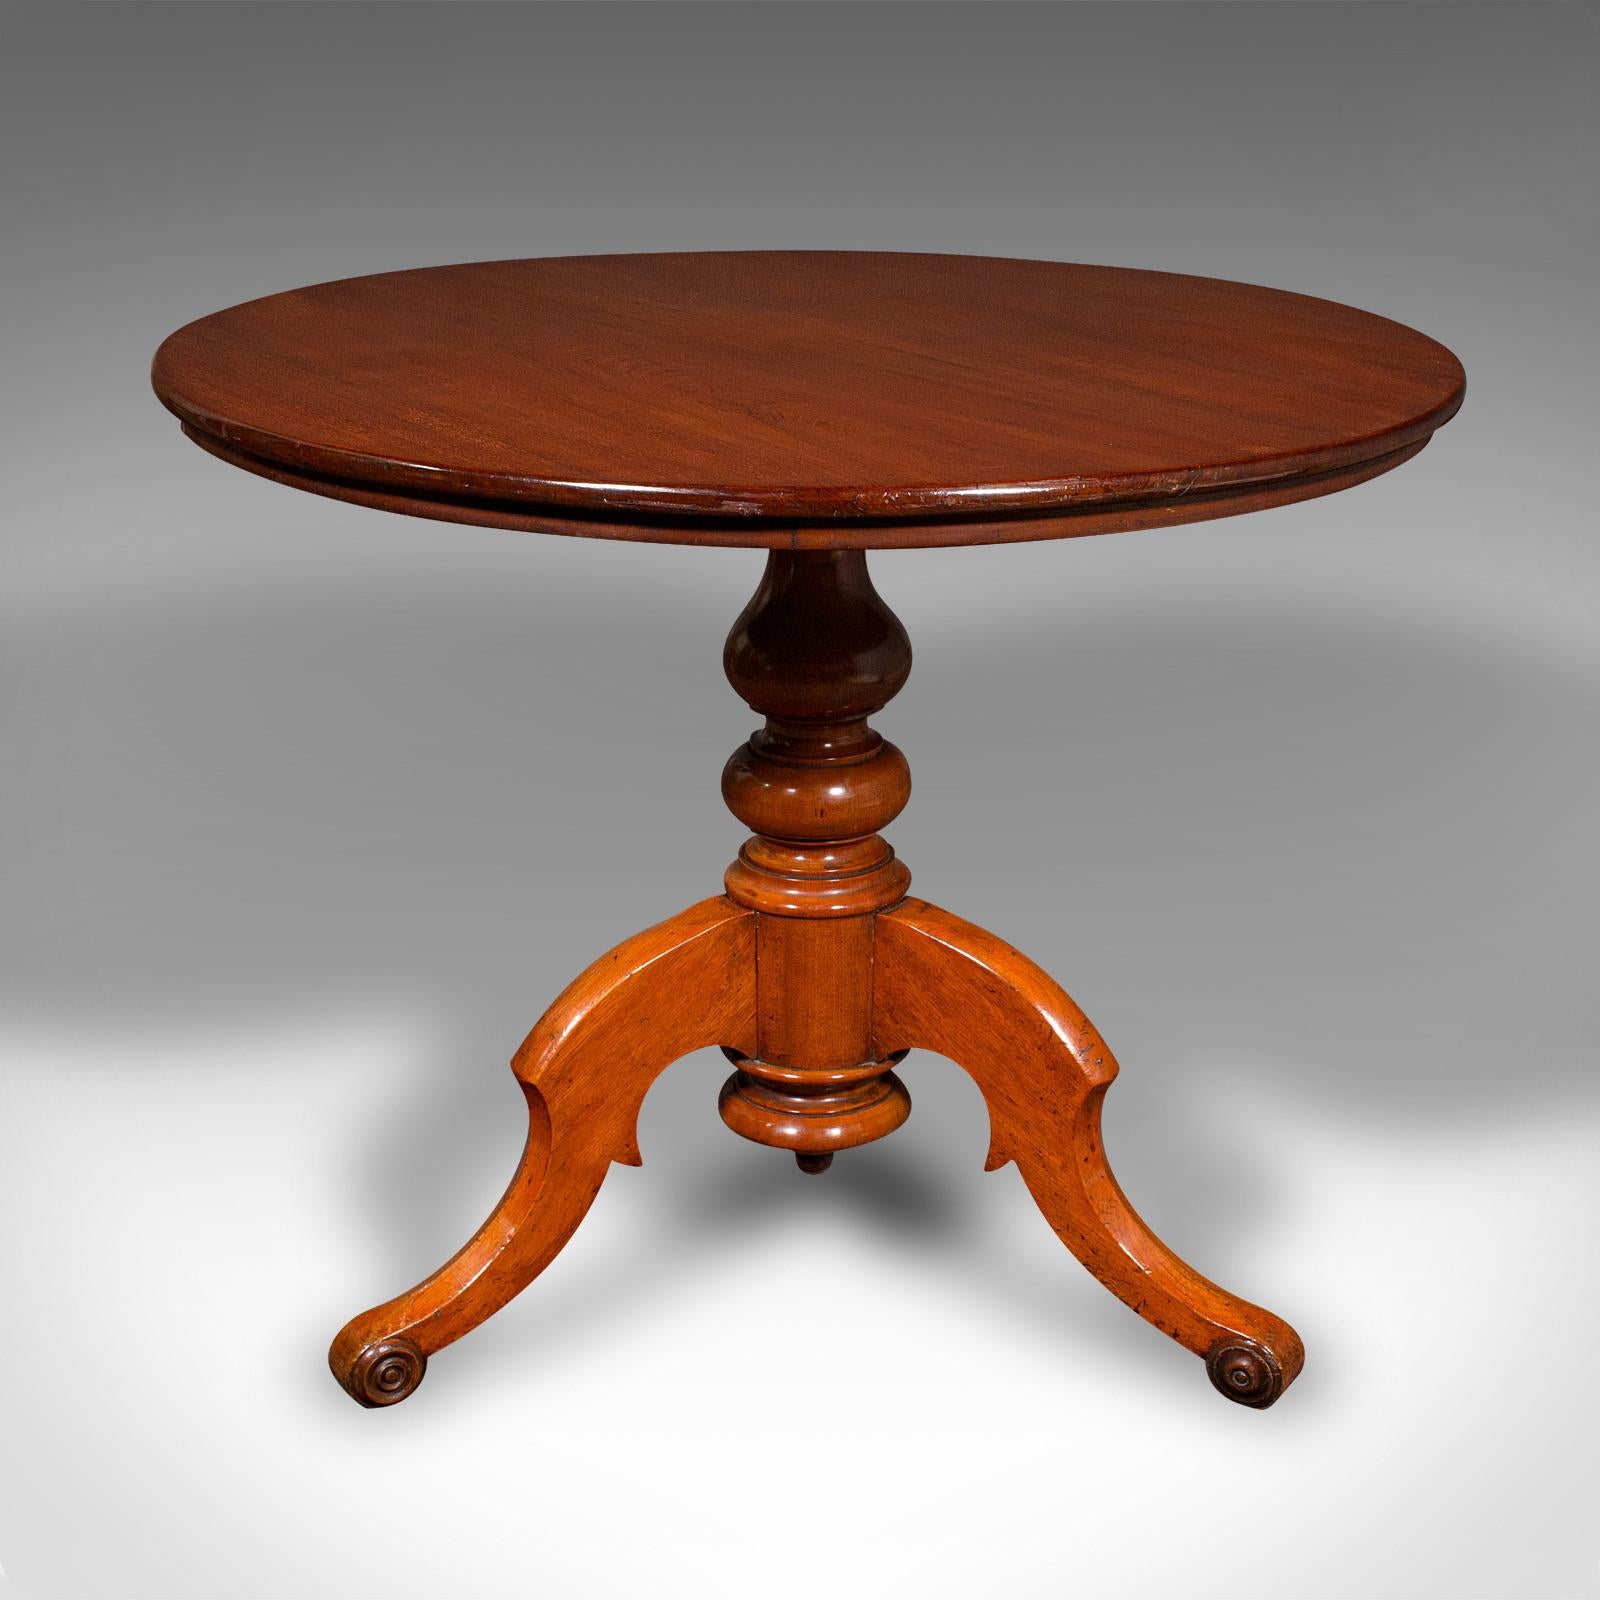 This is an antique display table. An English, walnut intimate dining table for 2-4 people, dating to the early Victorian period, circa 1840.

Beautifully presented table, with appealing figuring and fine craftsmanship
Displaying a desirable aged